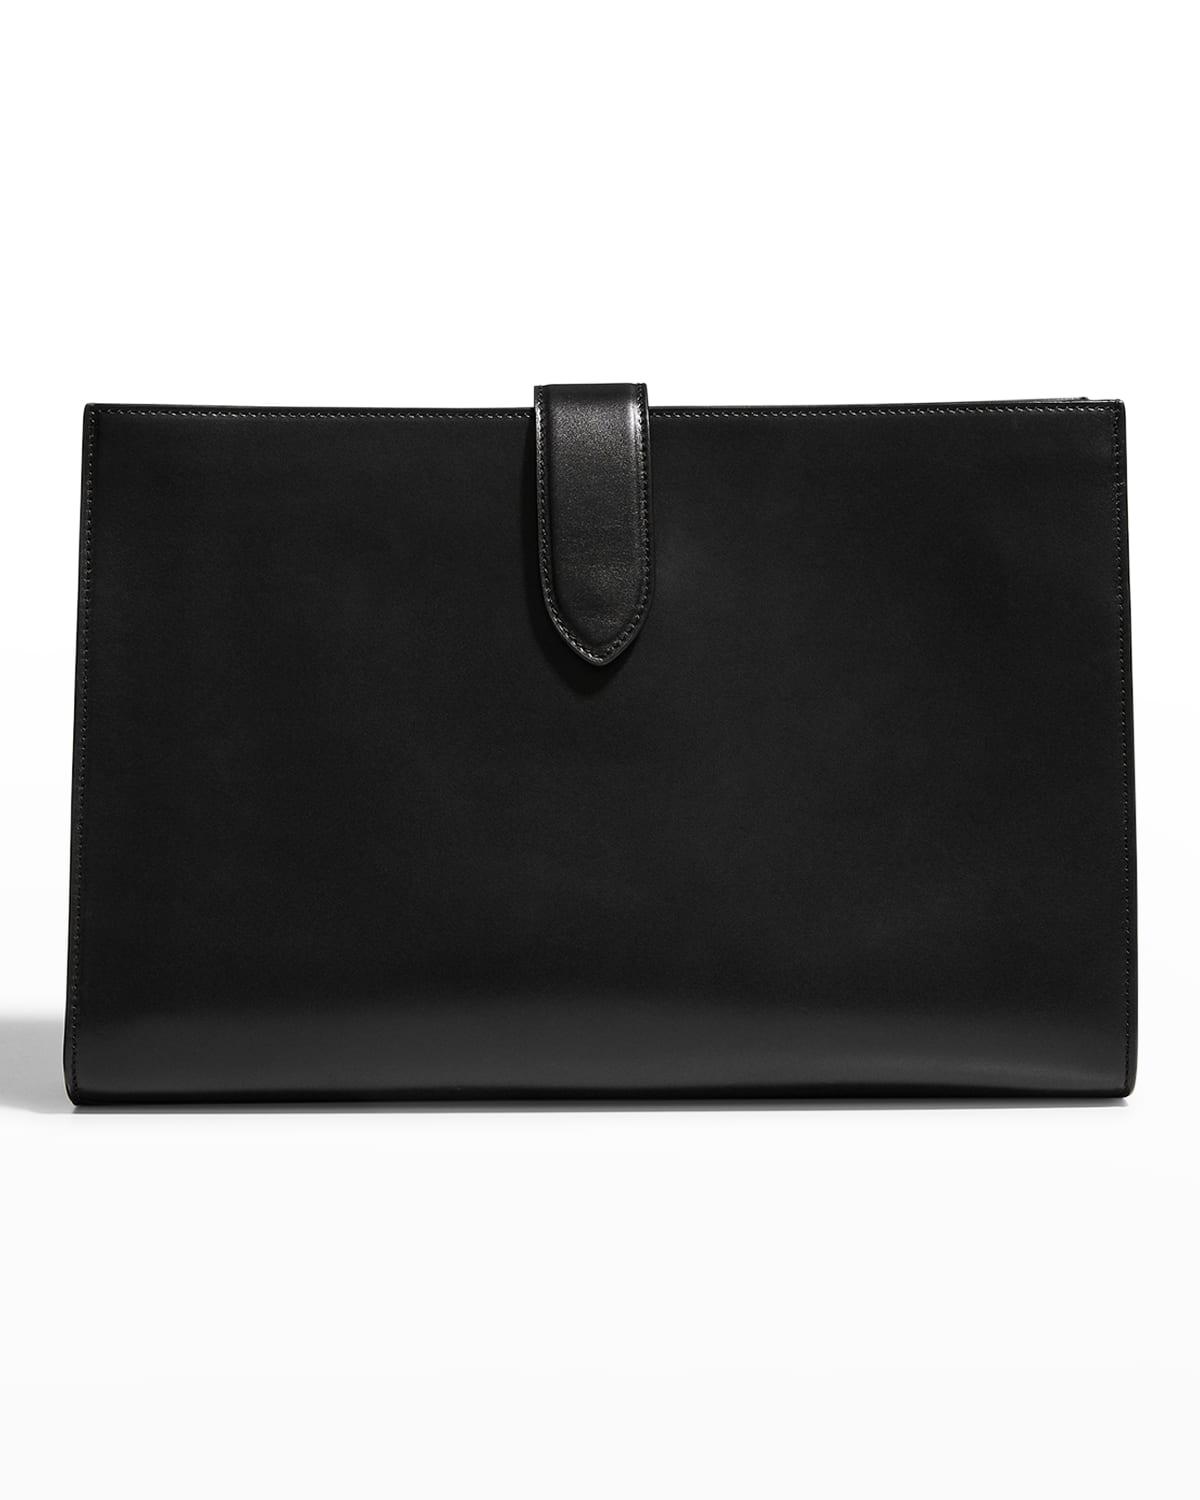 Bourse Clutch Bag Black in Leather – The Row